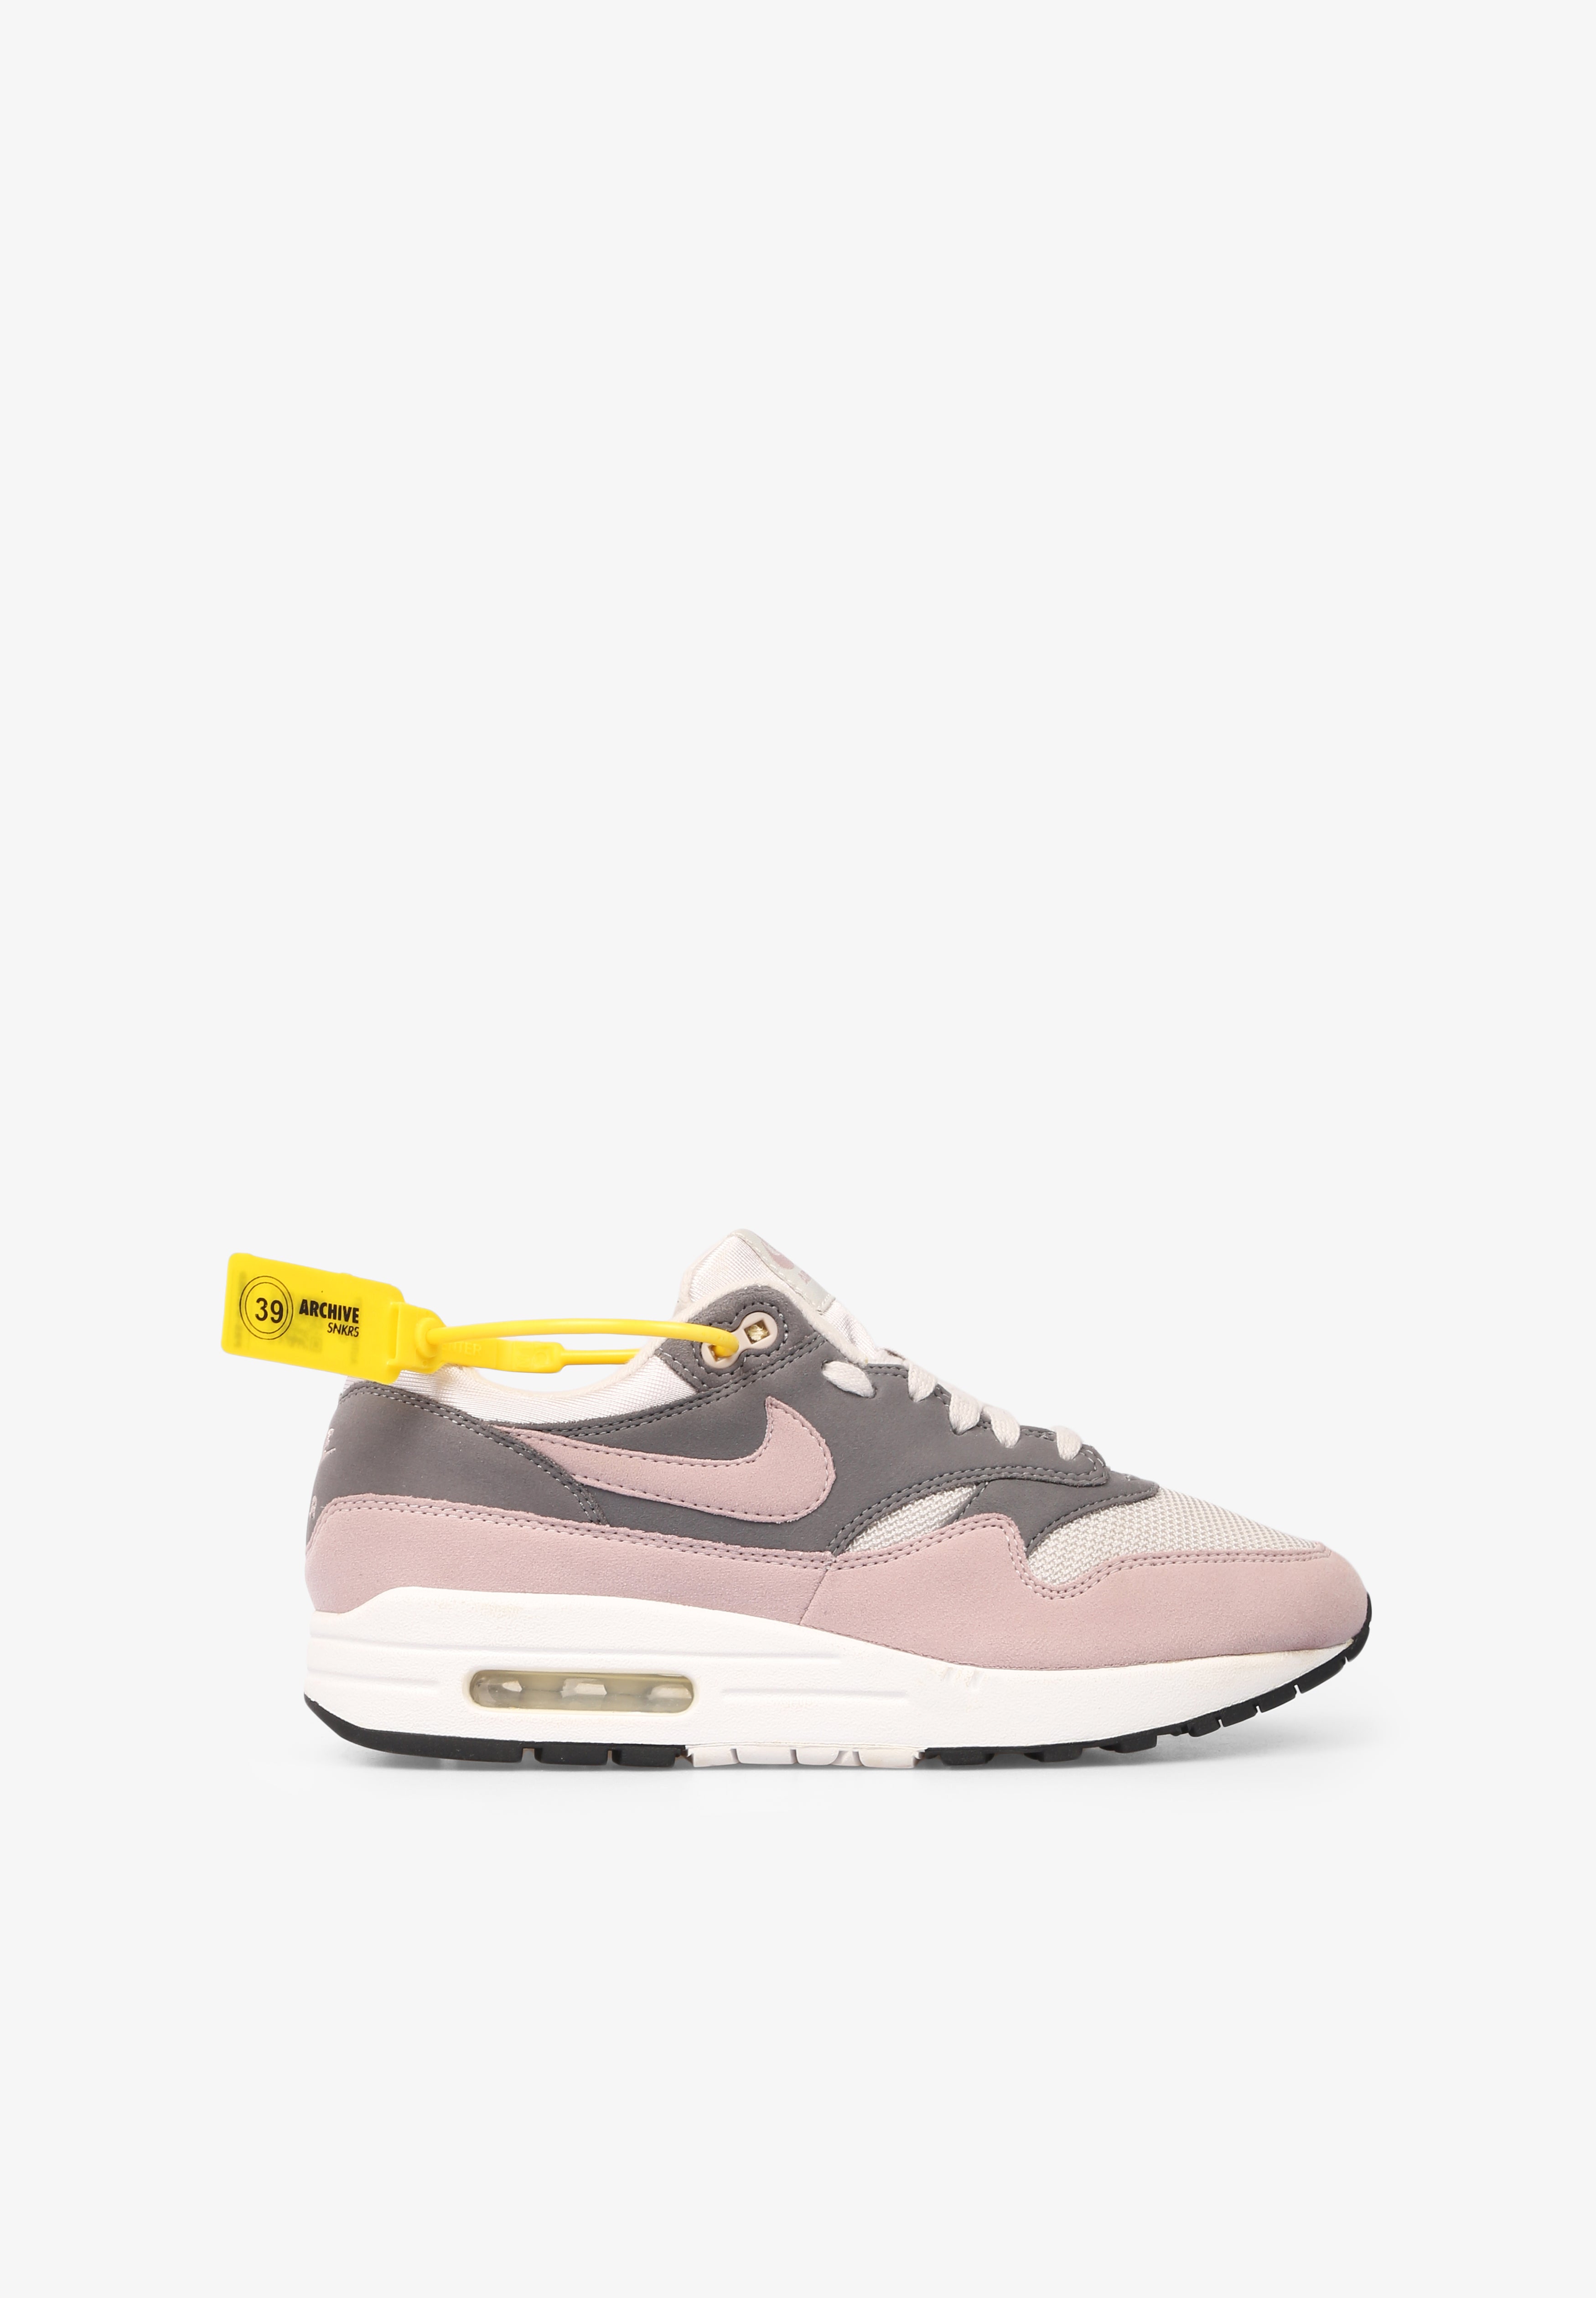 ARCHIVE SNEAKRS | SNEAKERS NIKE WMNS AIR MAX 1 TALLA 40